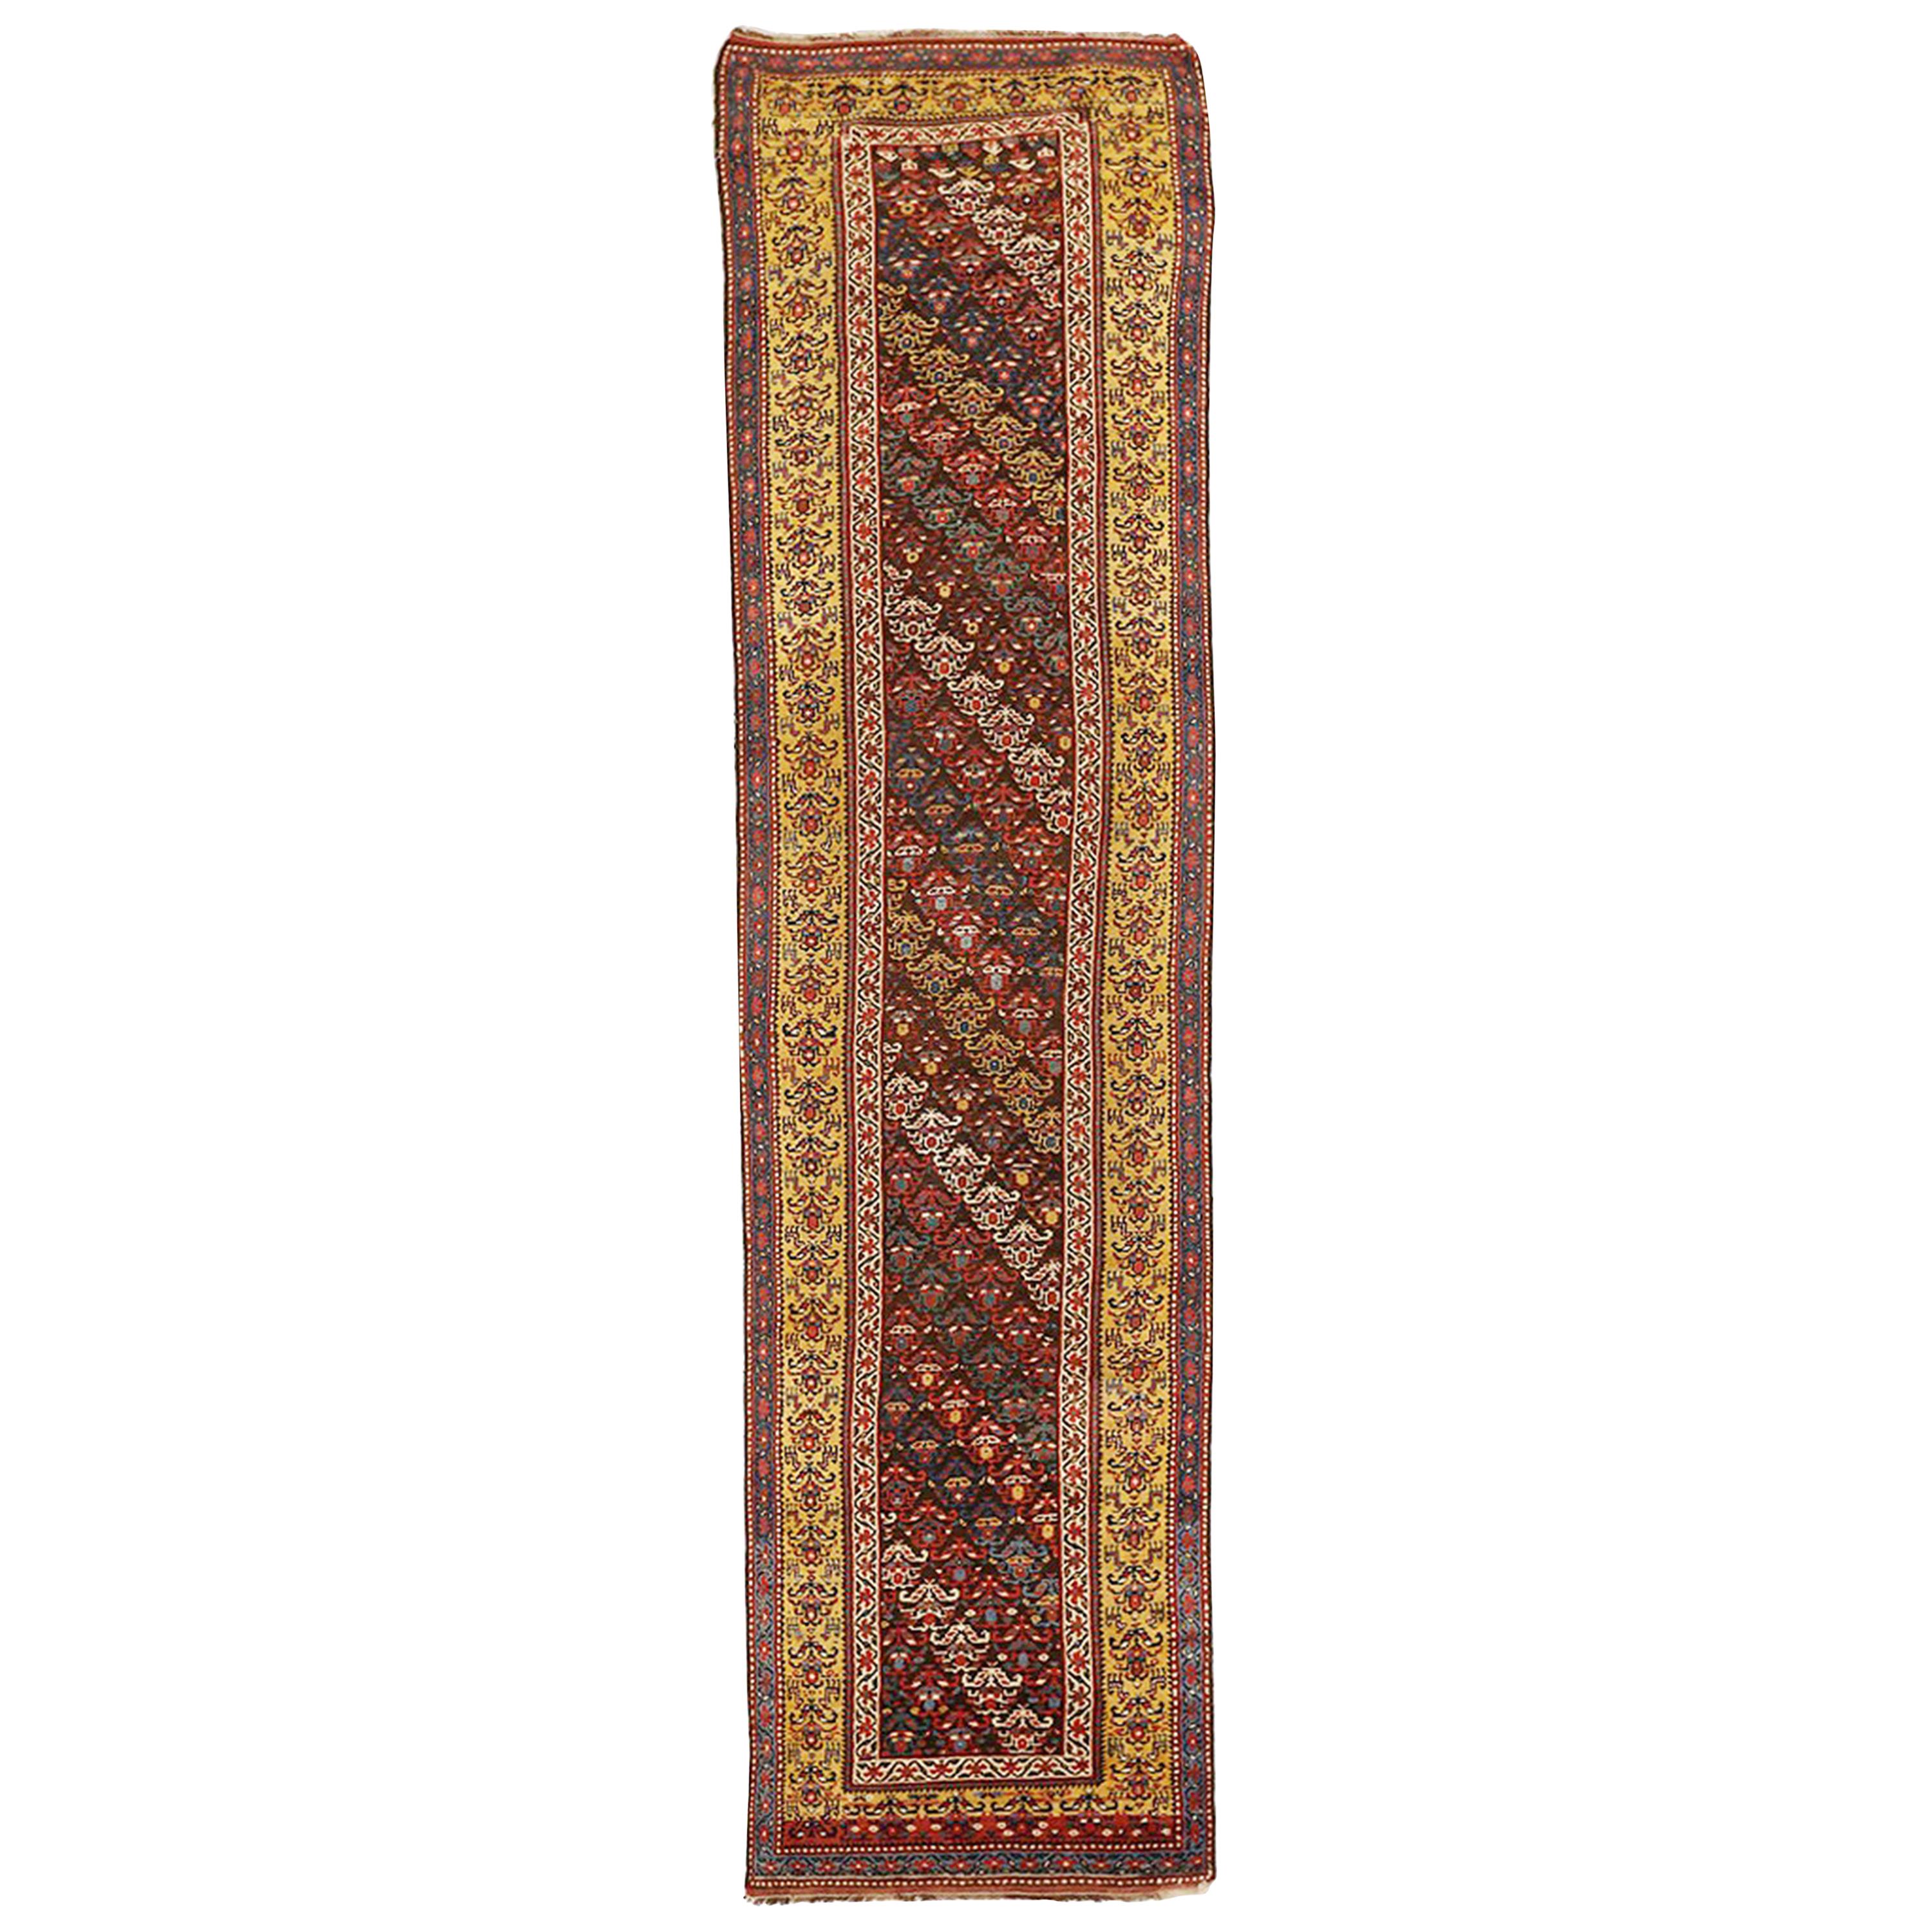 20th Century Antique Azerbaijan Runner Rug with Colored Floral Motifs All-Over